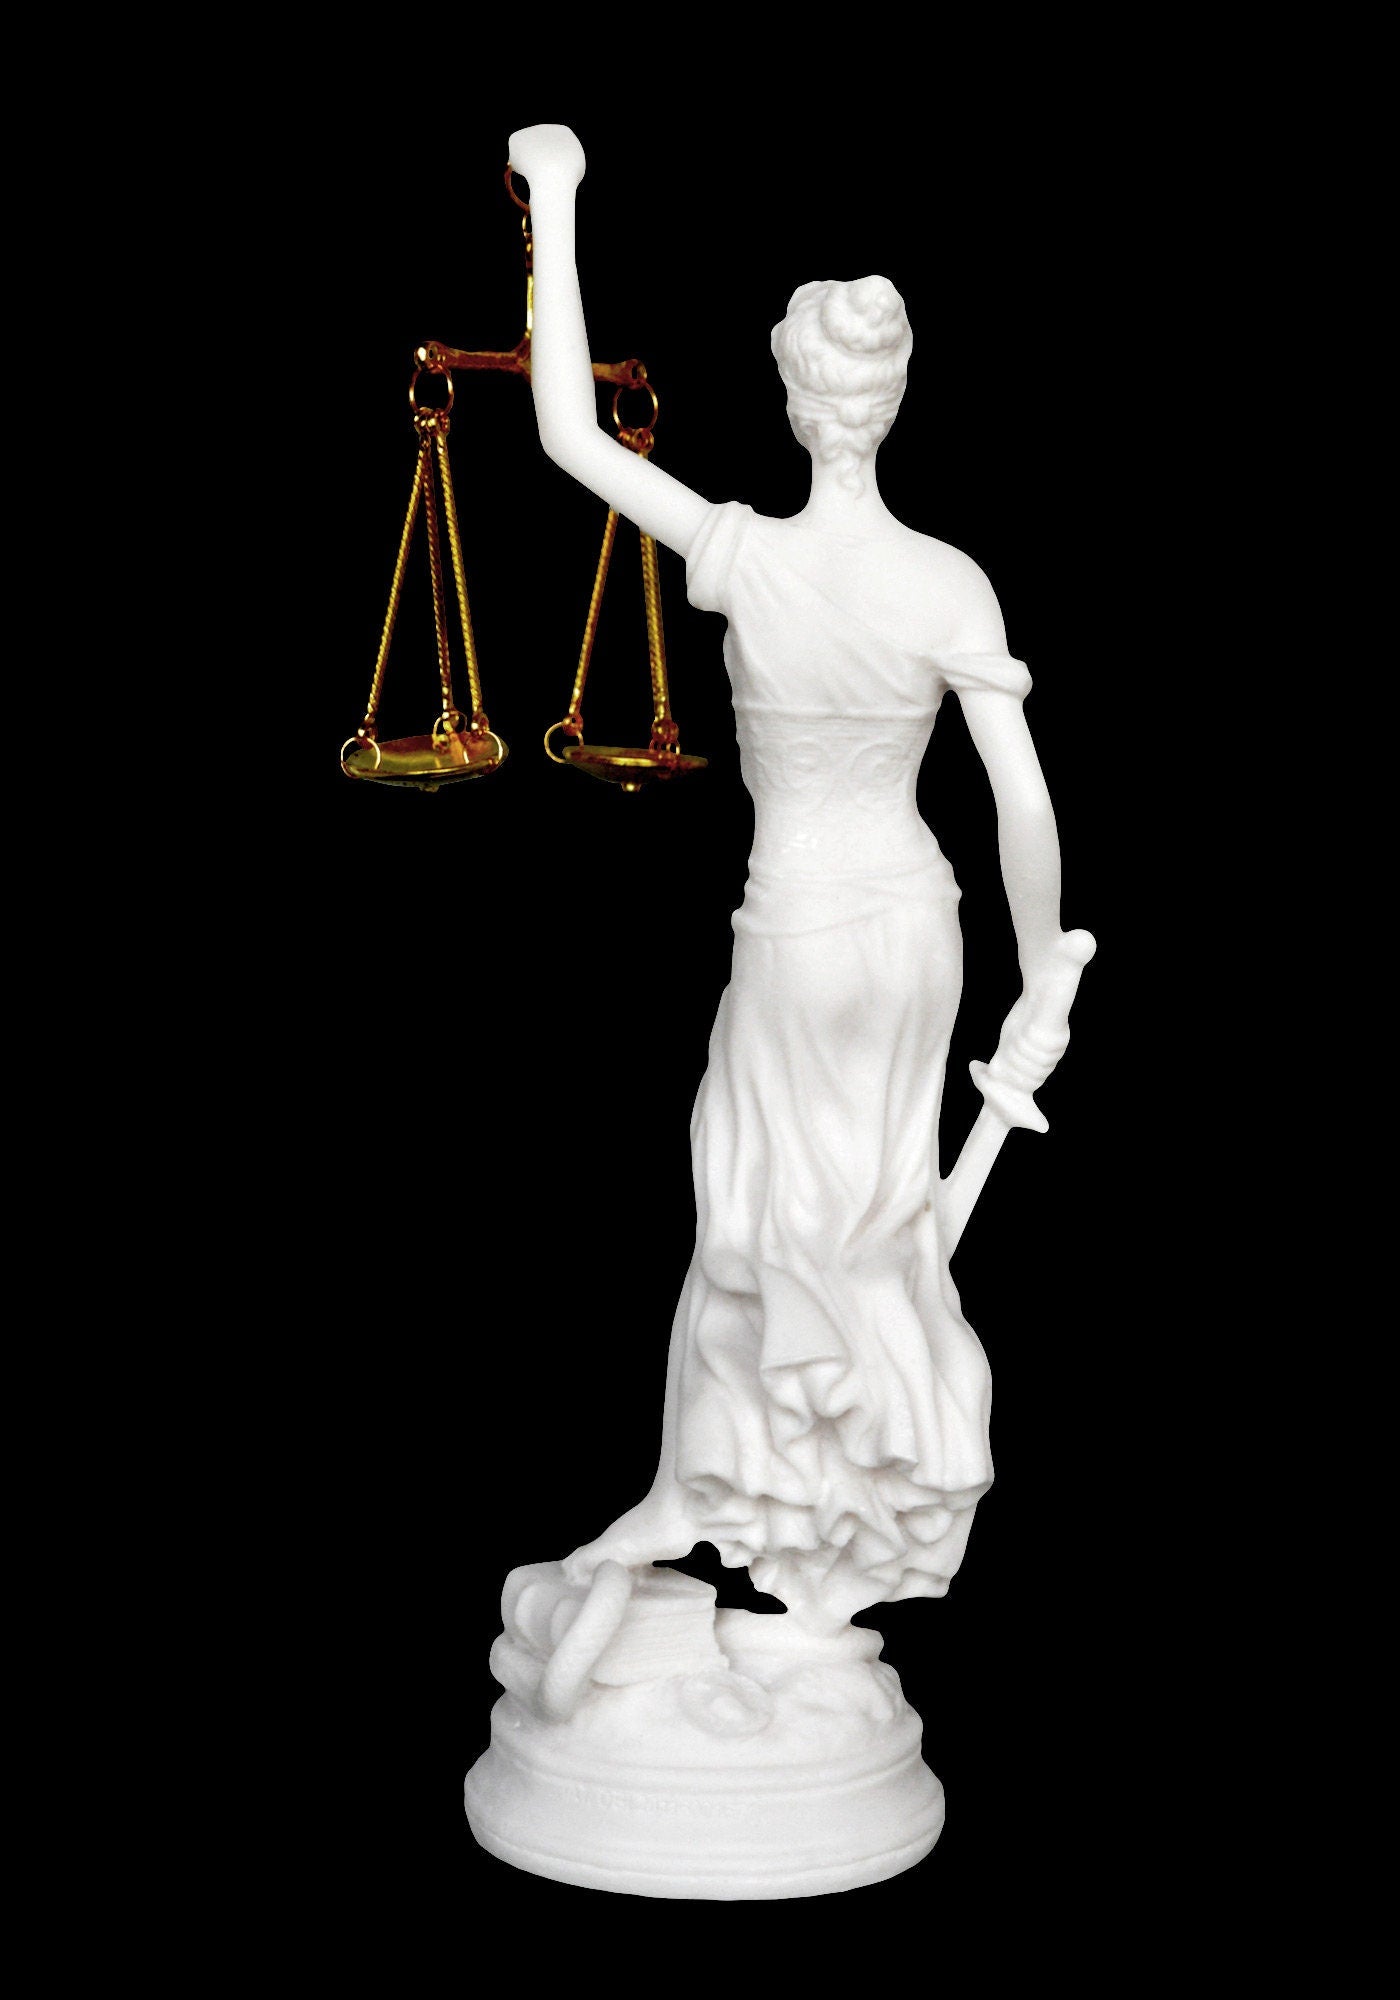 Themis - Goddess of Justice, Divine law and Order, Wisdom and Good Counsel and the Interpreter of the Gods' Will - Alabaster Statue